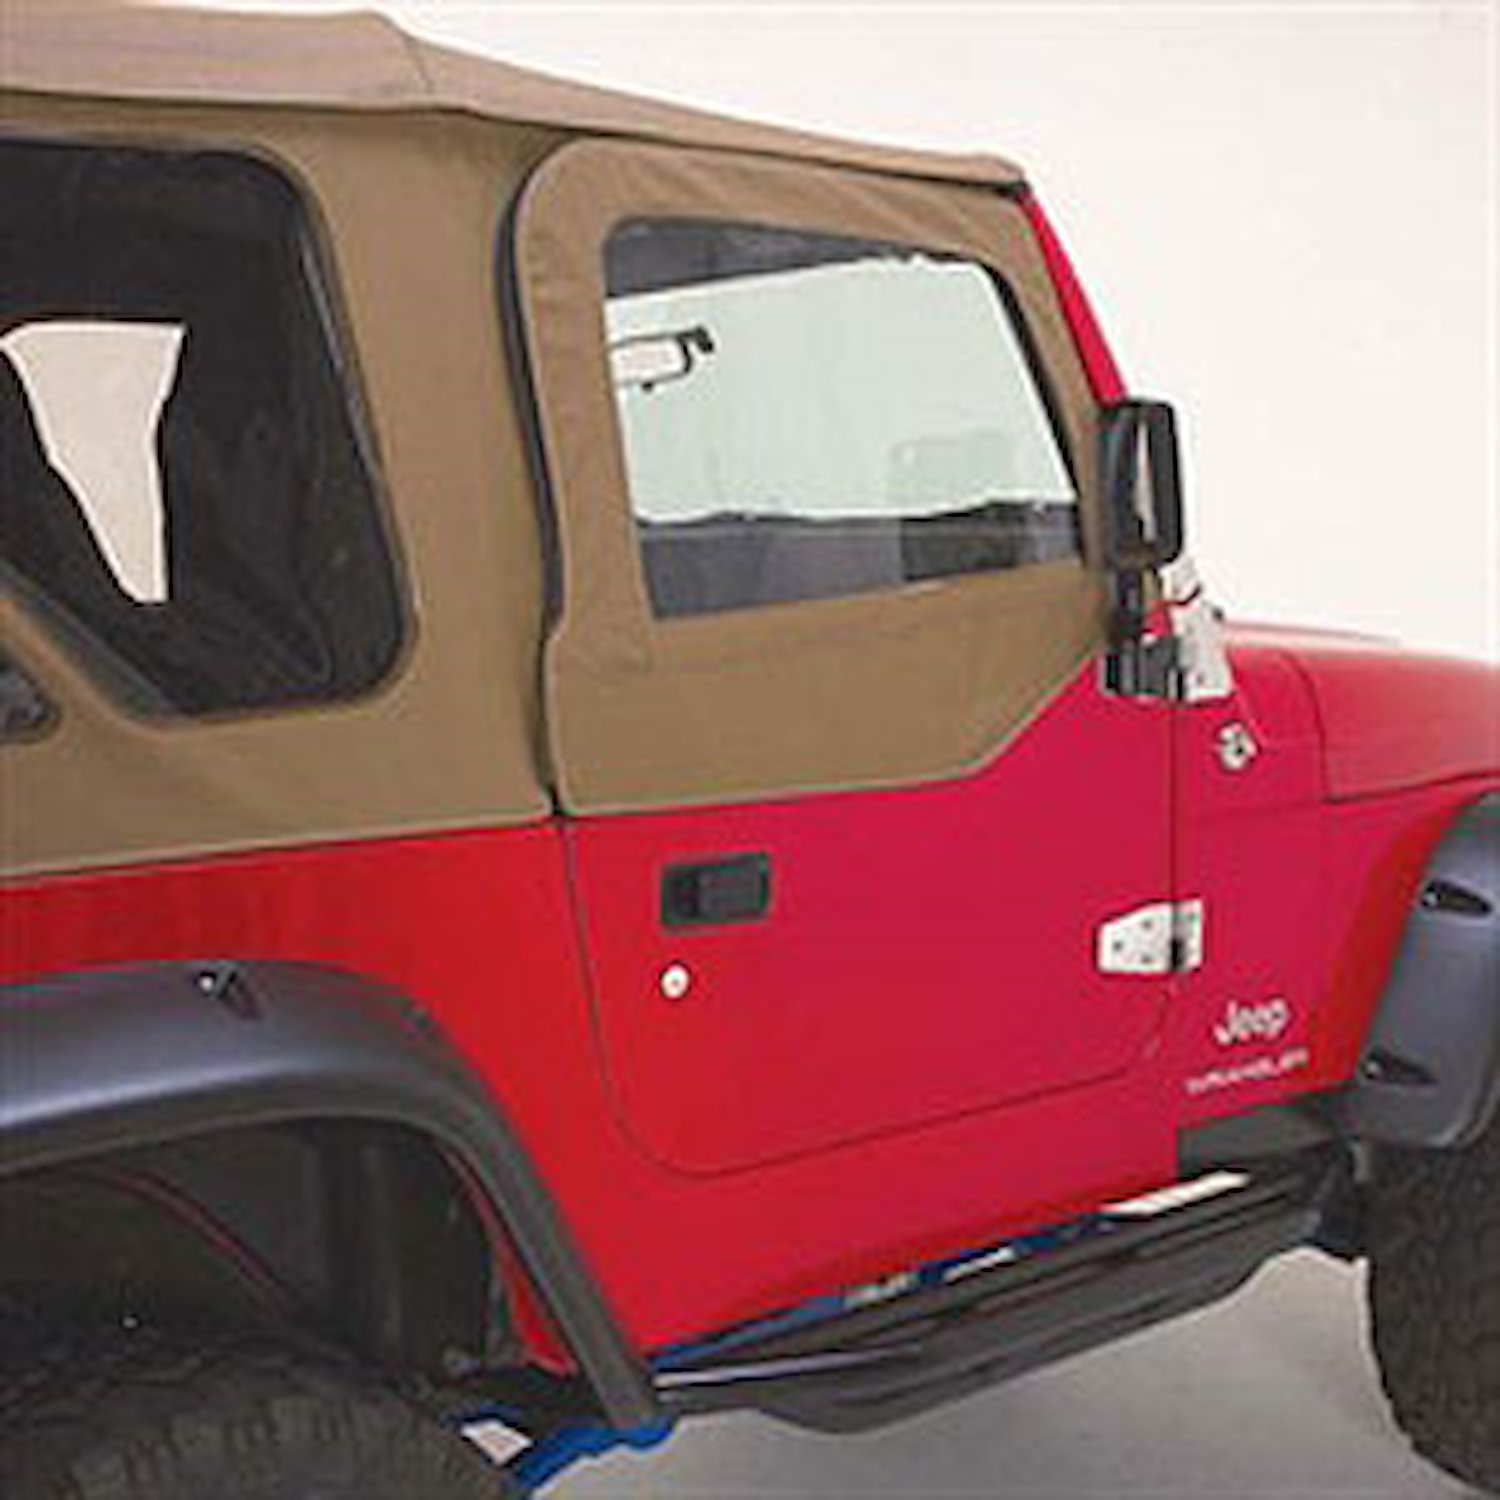 COMPLETE TOP FRAME AND HARDWARE W/ TINTED WINDOWS 97-06 JEEP WRANGLER WITH SOFT UPPER DOORS SPICE DENIM